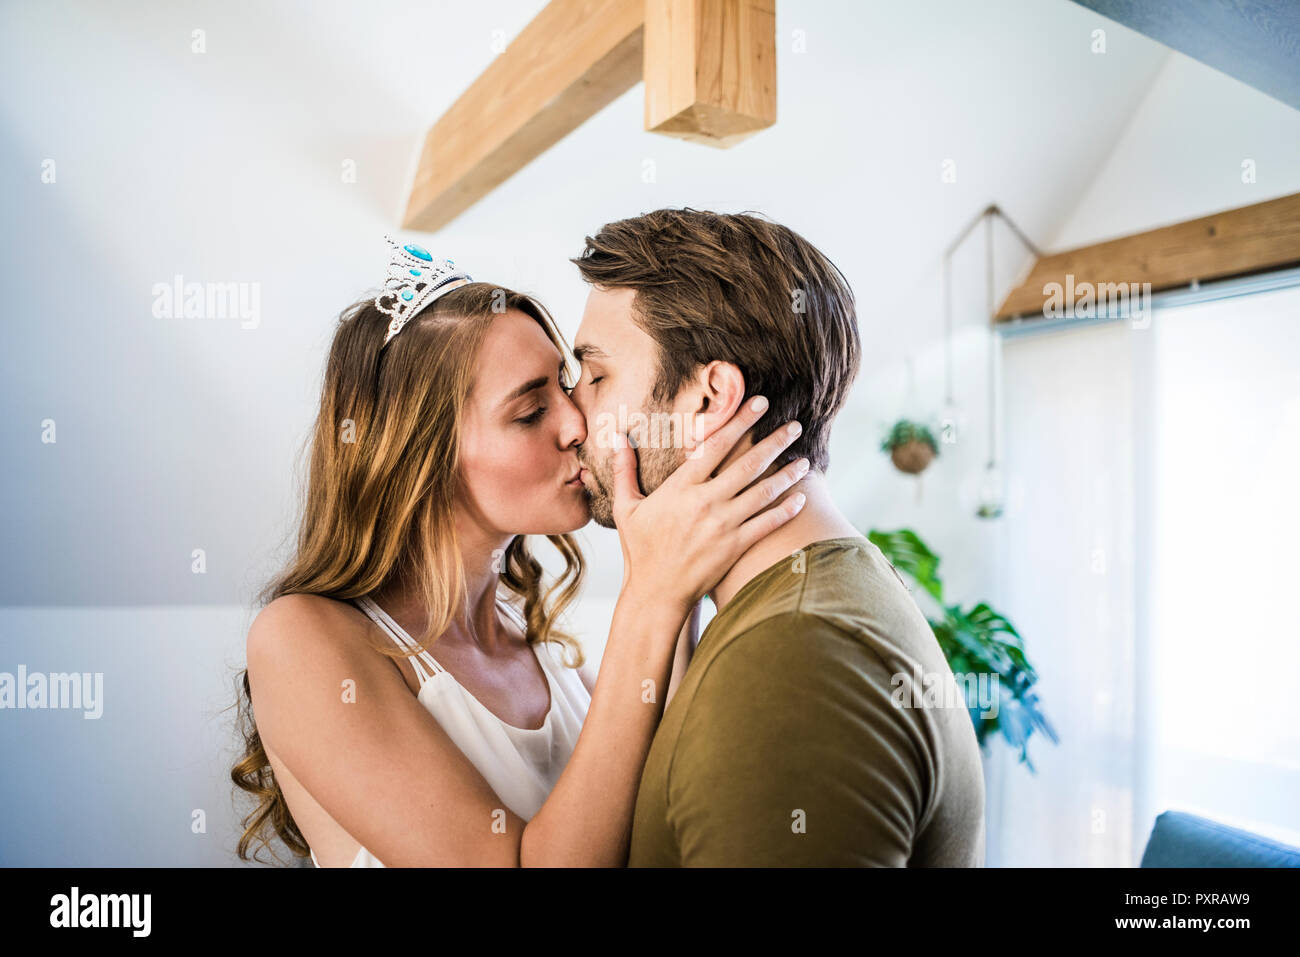 Affectionate couple kissing at home with woman wearing tiara Stock Photo